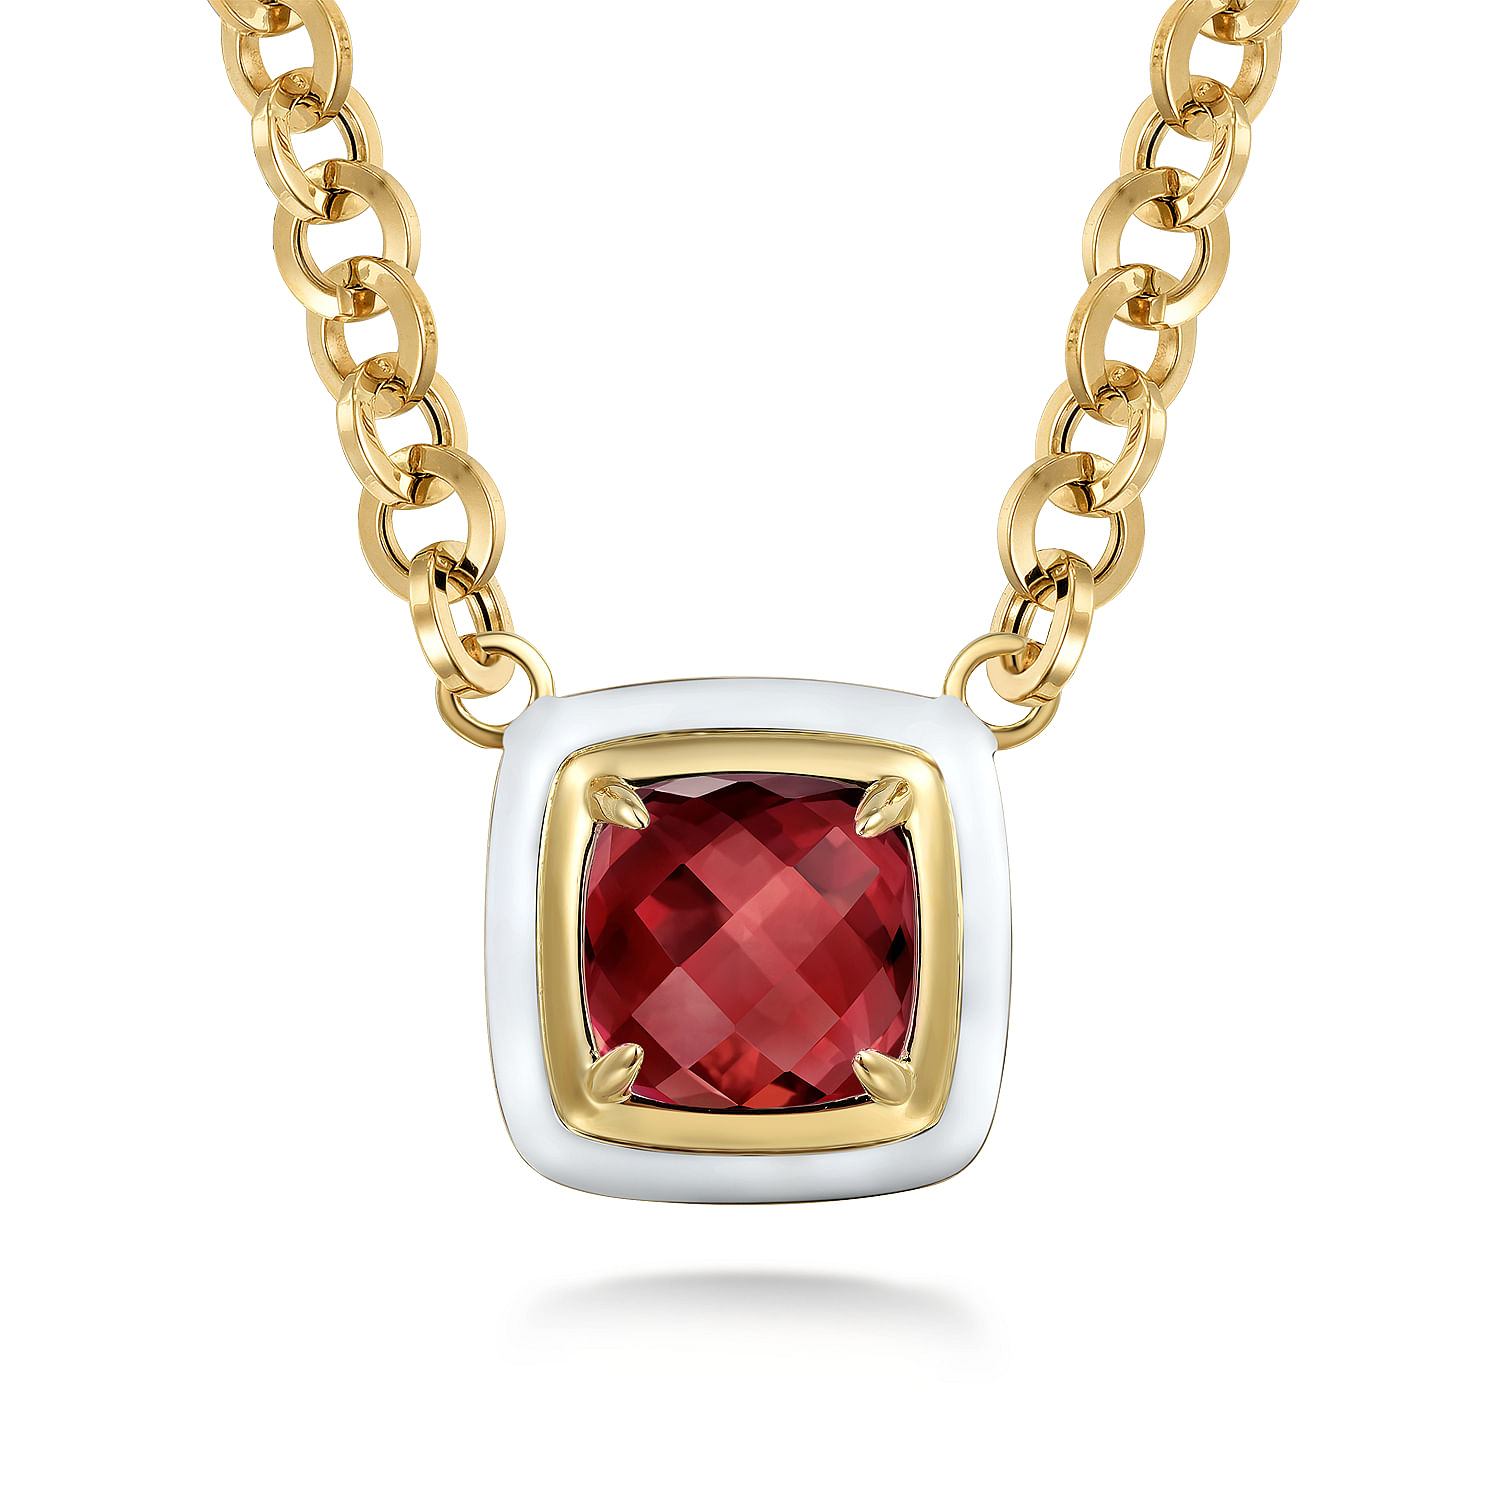 14K Yellow Gold Garnet Cushion Cut Necklace With Flower Pattern J-Back and White Enamel